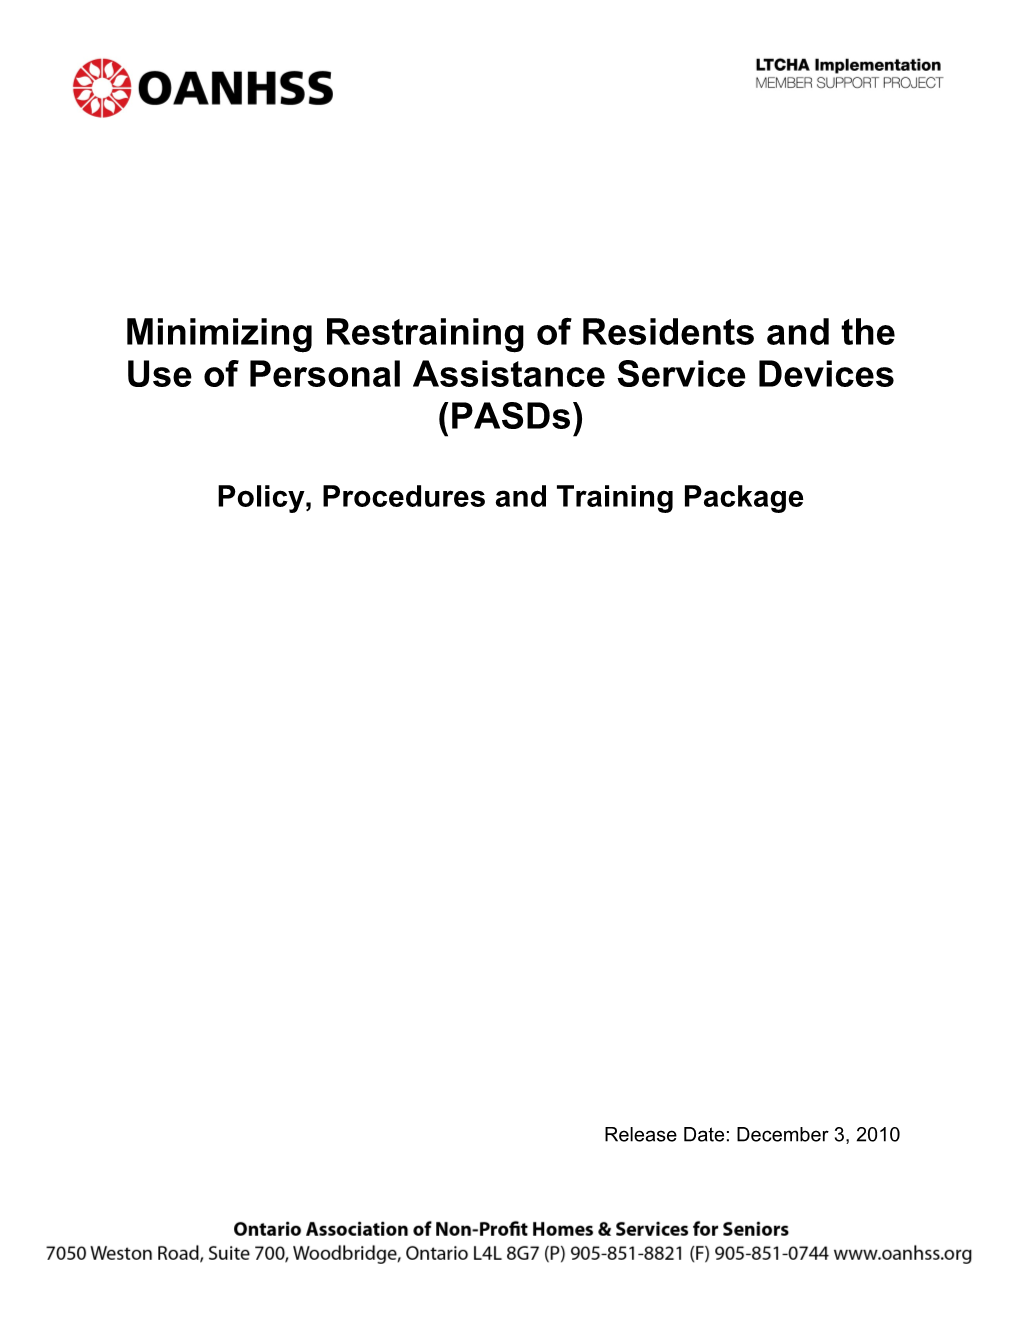 Minimizing Restraining of Residents and the Use of Pasds Policy Procedures and Staff Training